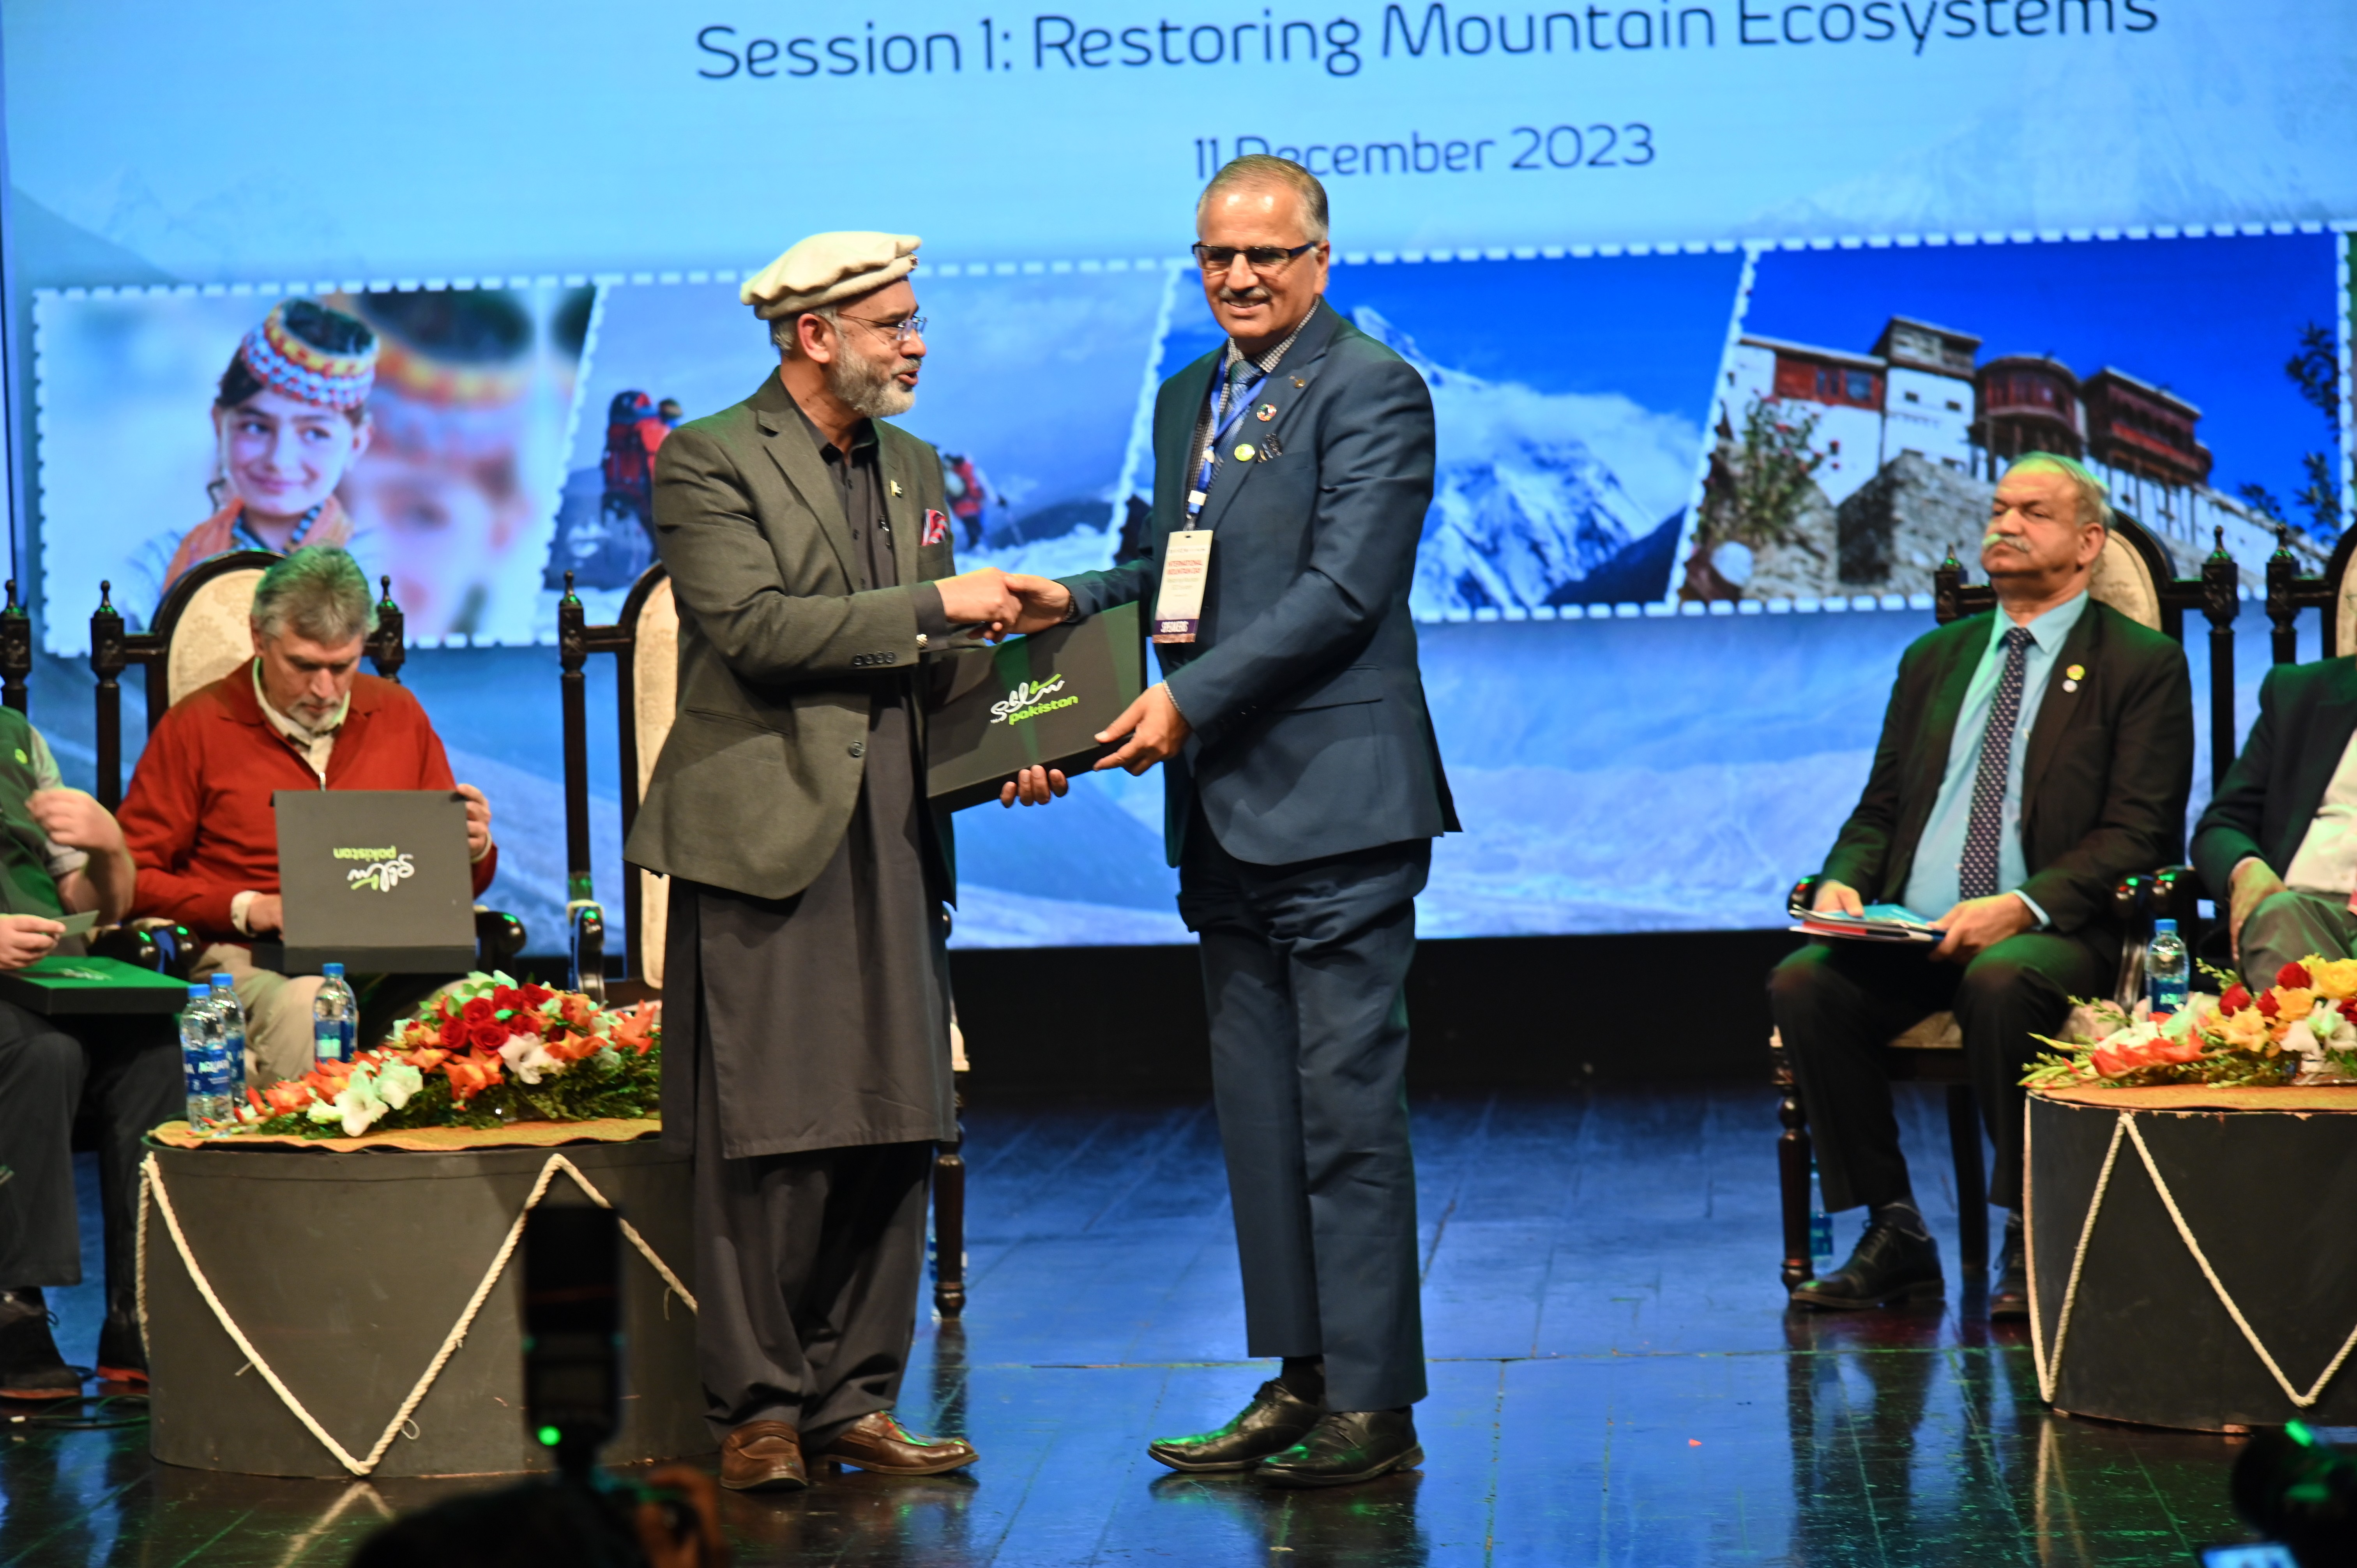 The Award Distribution Ceremony for appreciation on International Mountain Day at PNCA